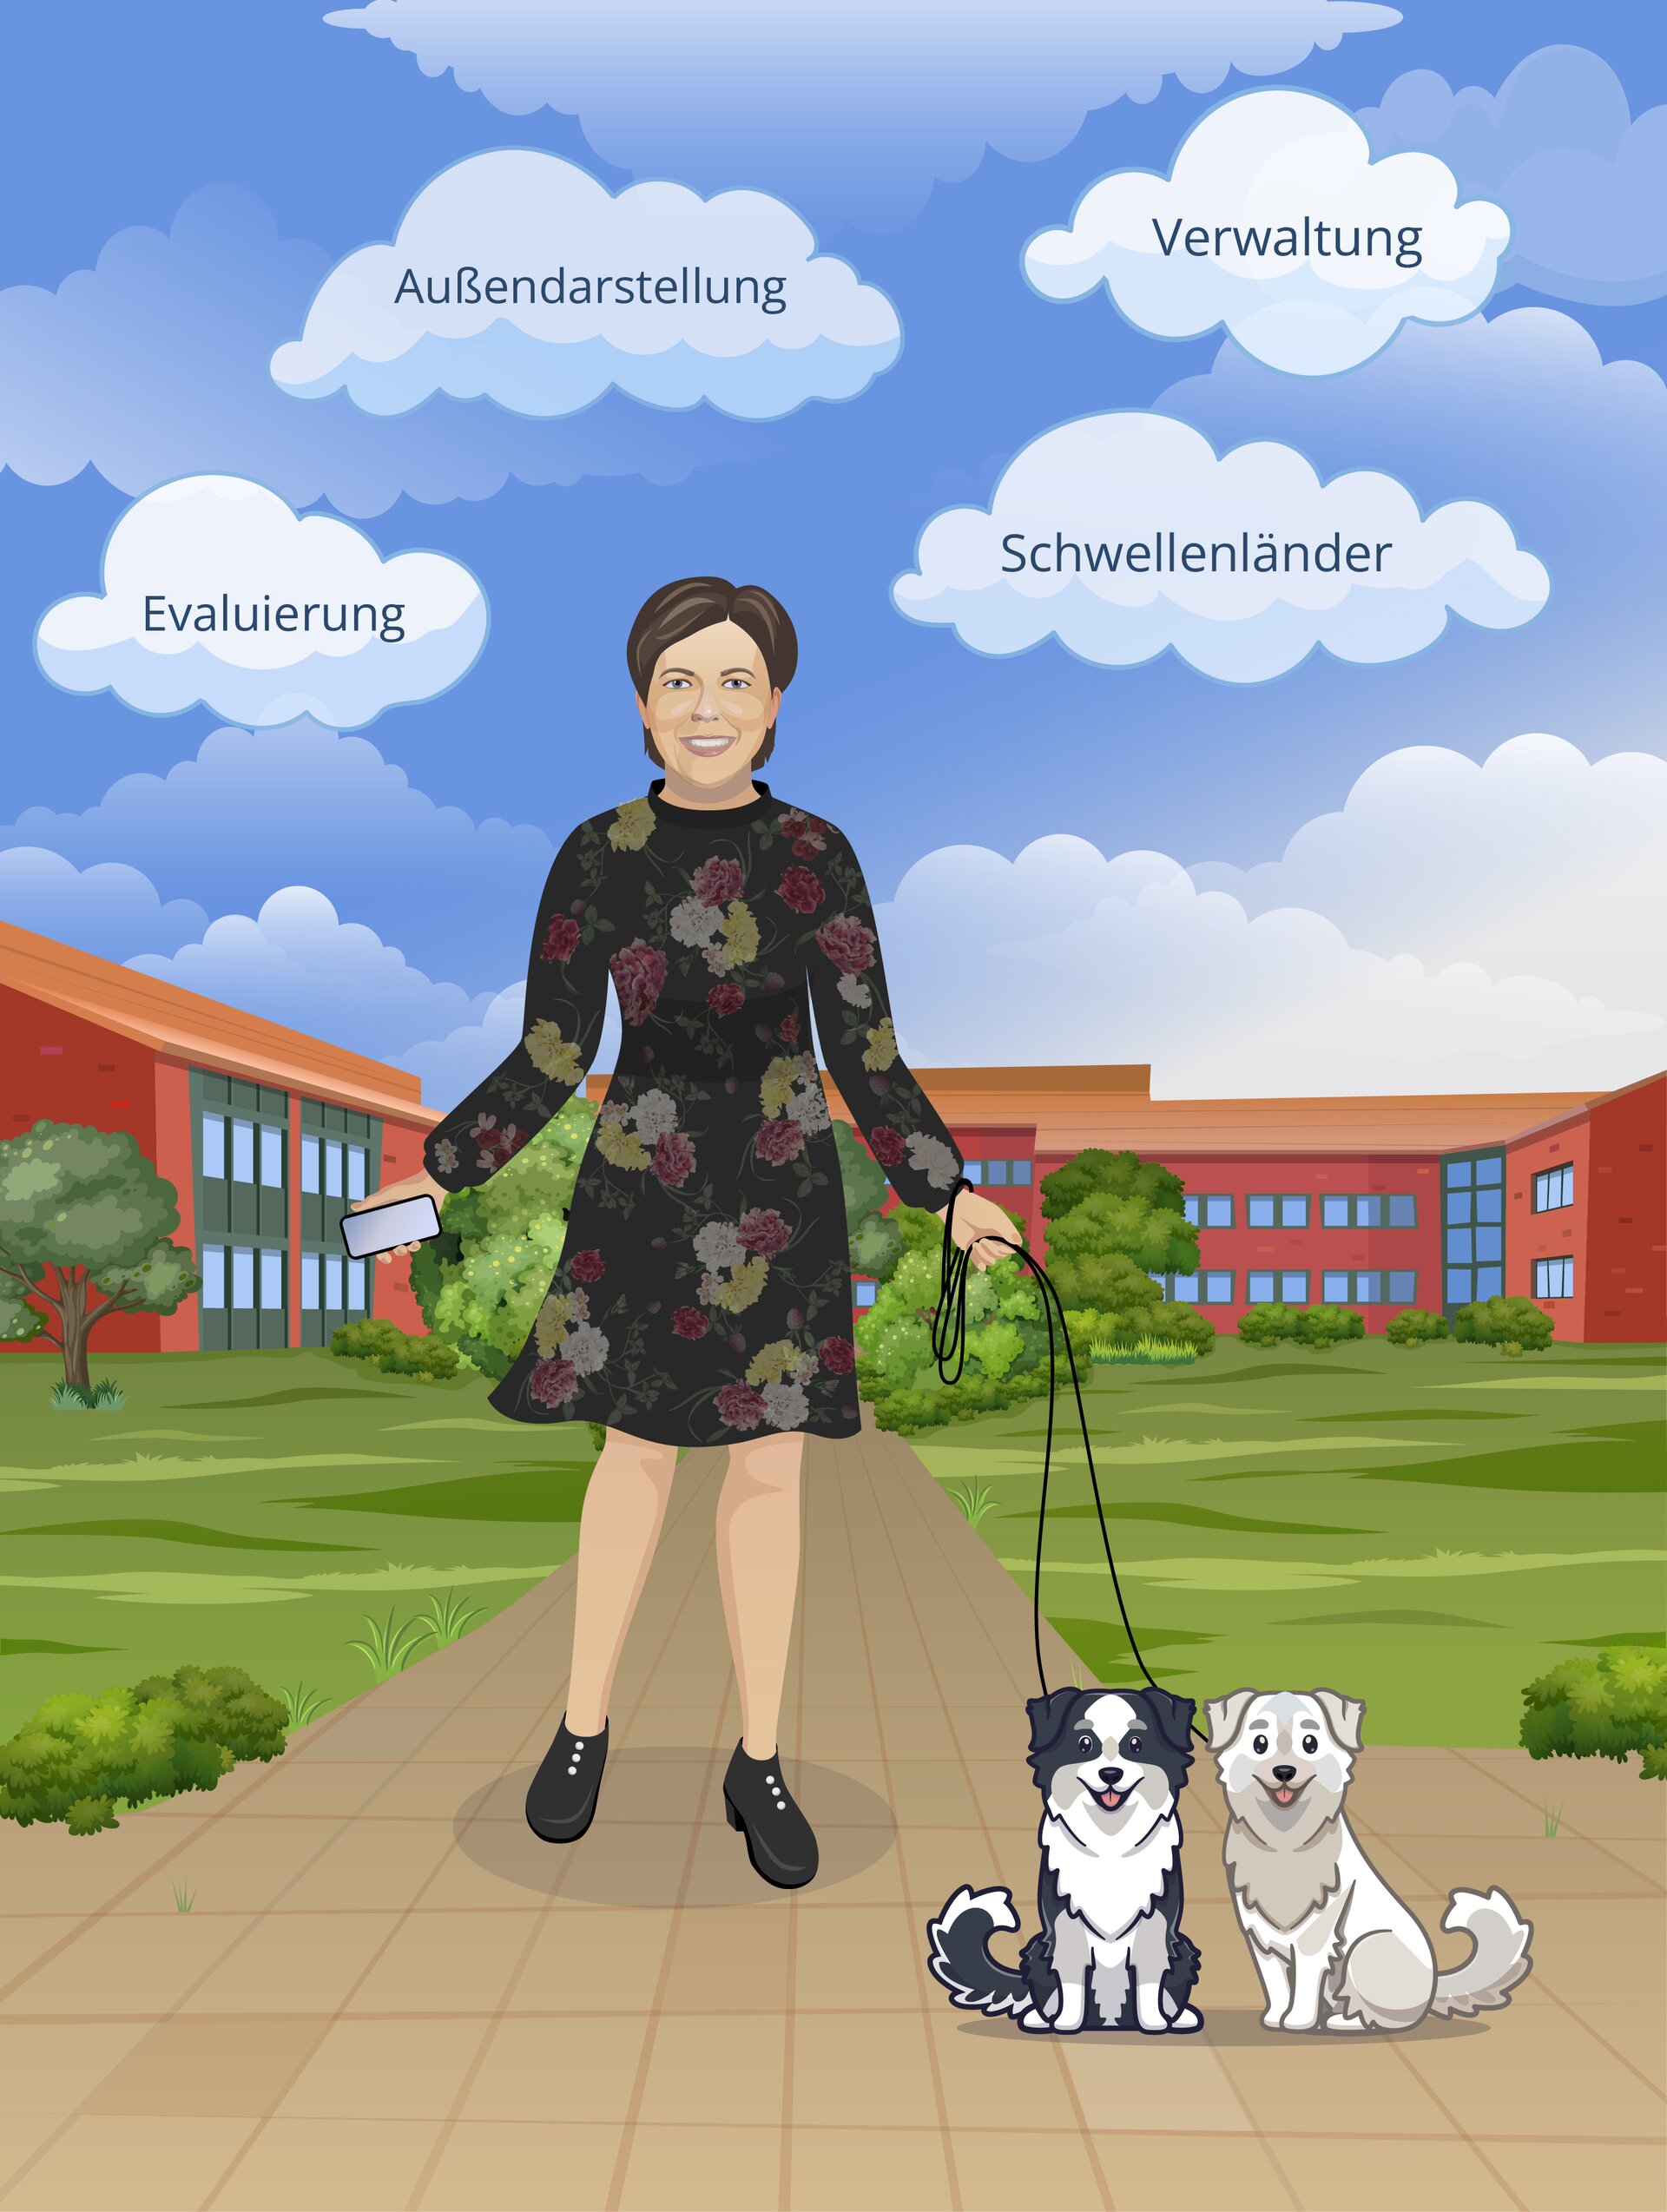 Woman standing in front of a building. She has a smartphone in her hand and two small dogs on a leash.